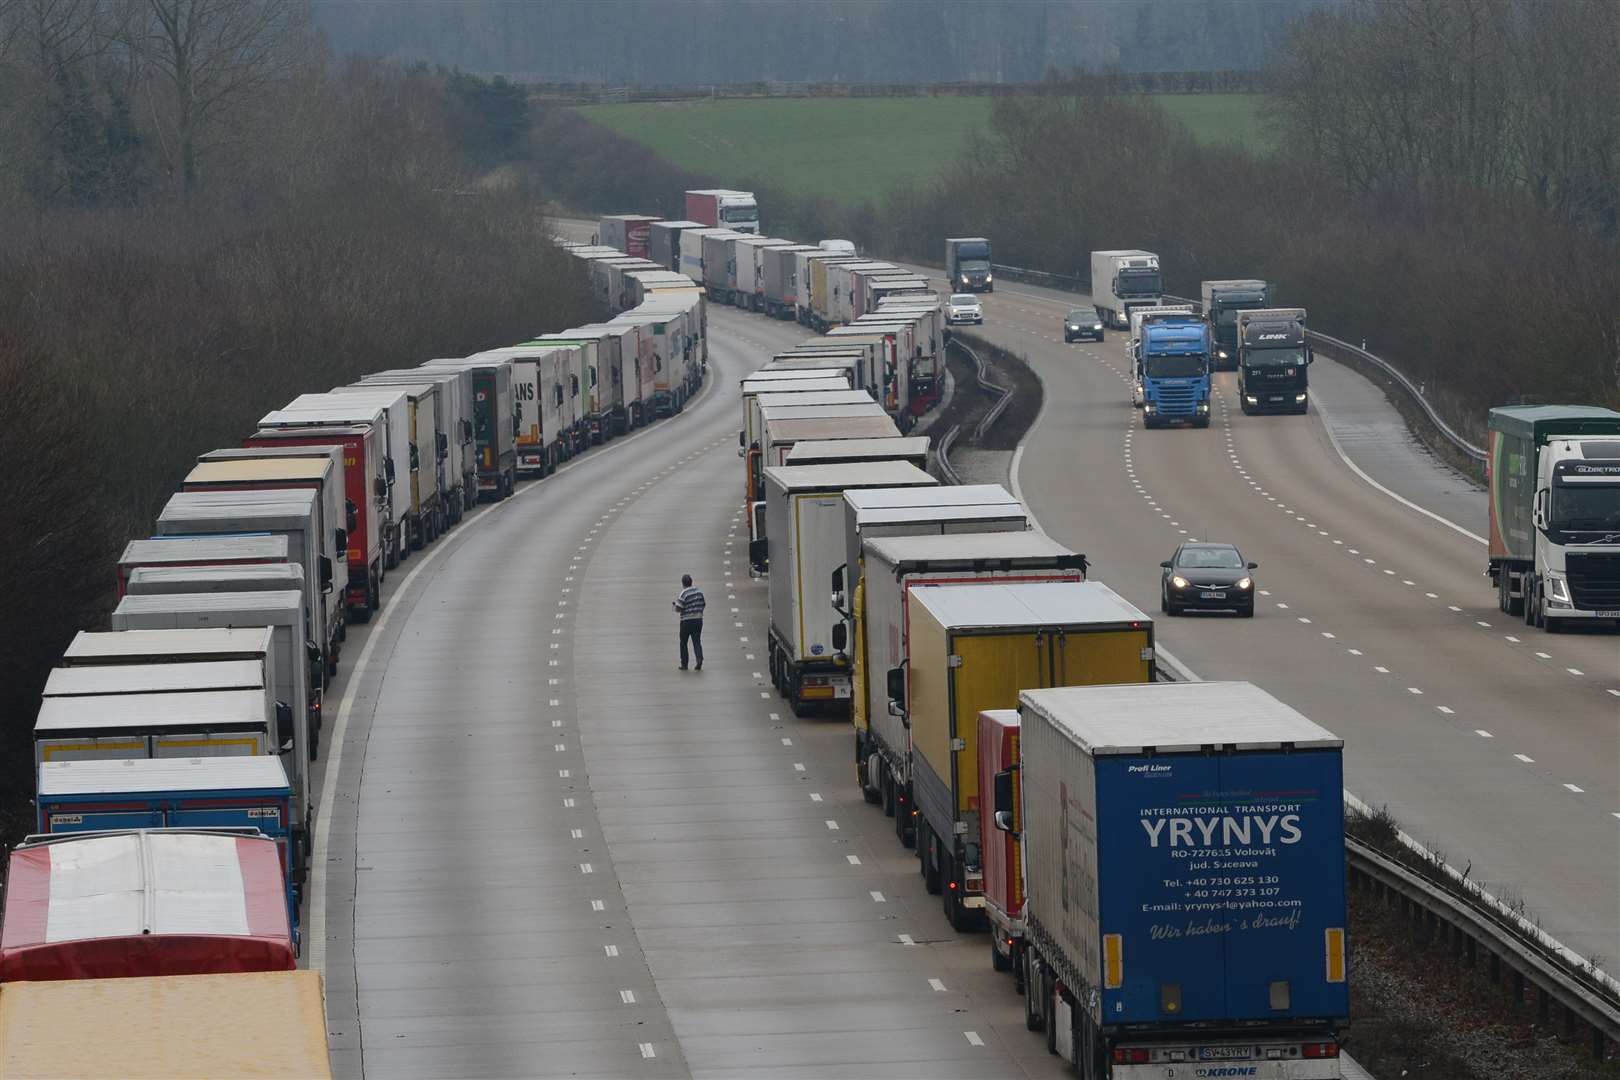 Operation stack on the M20